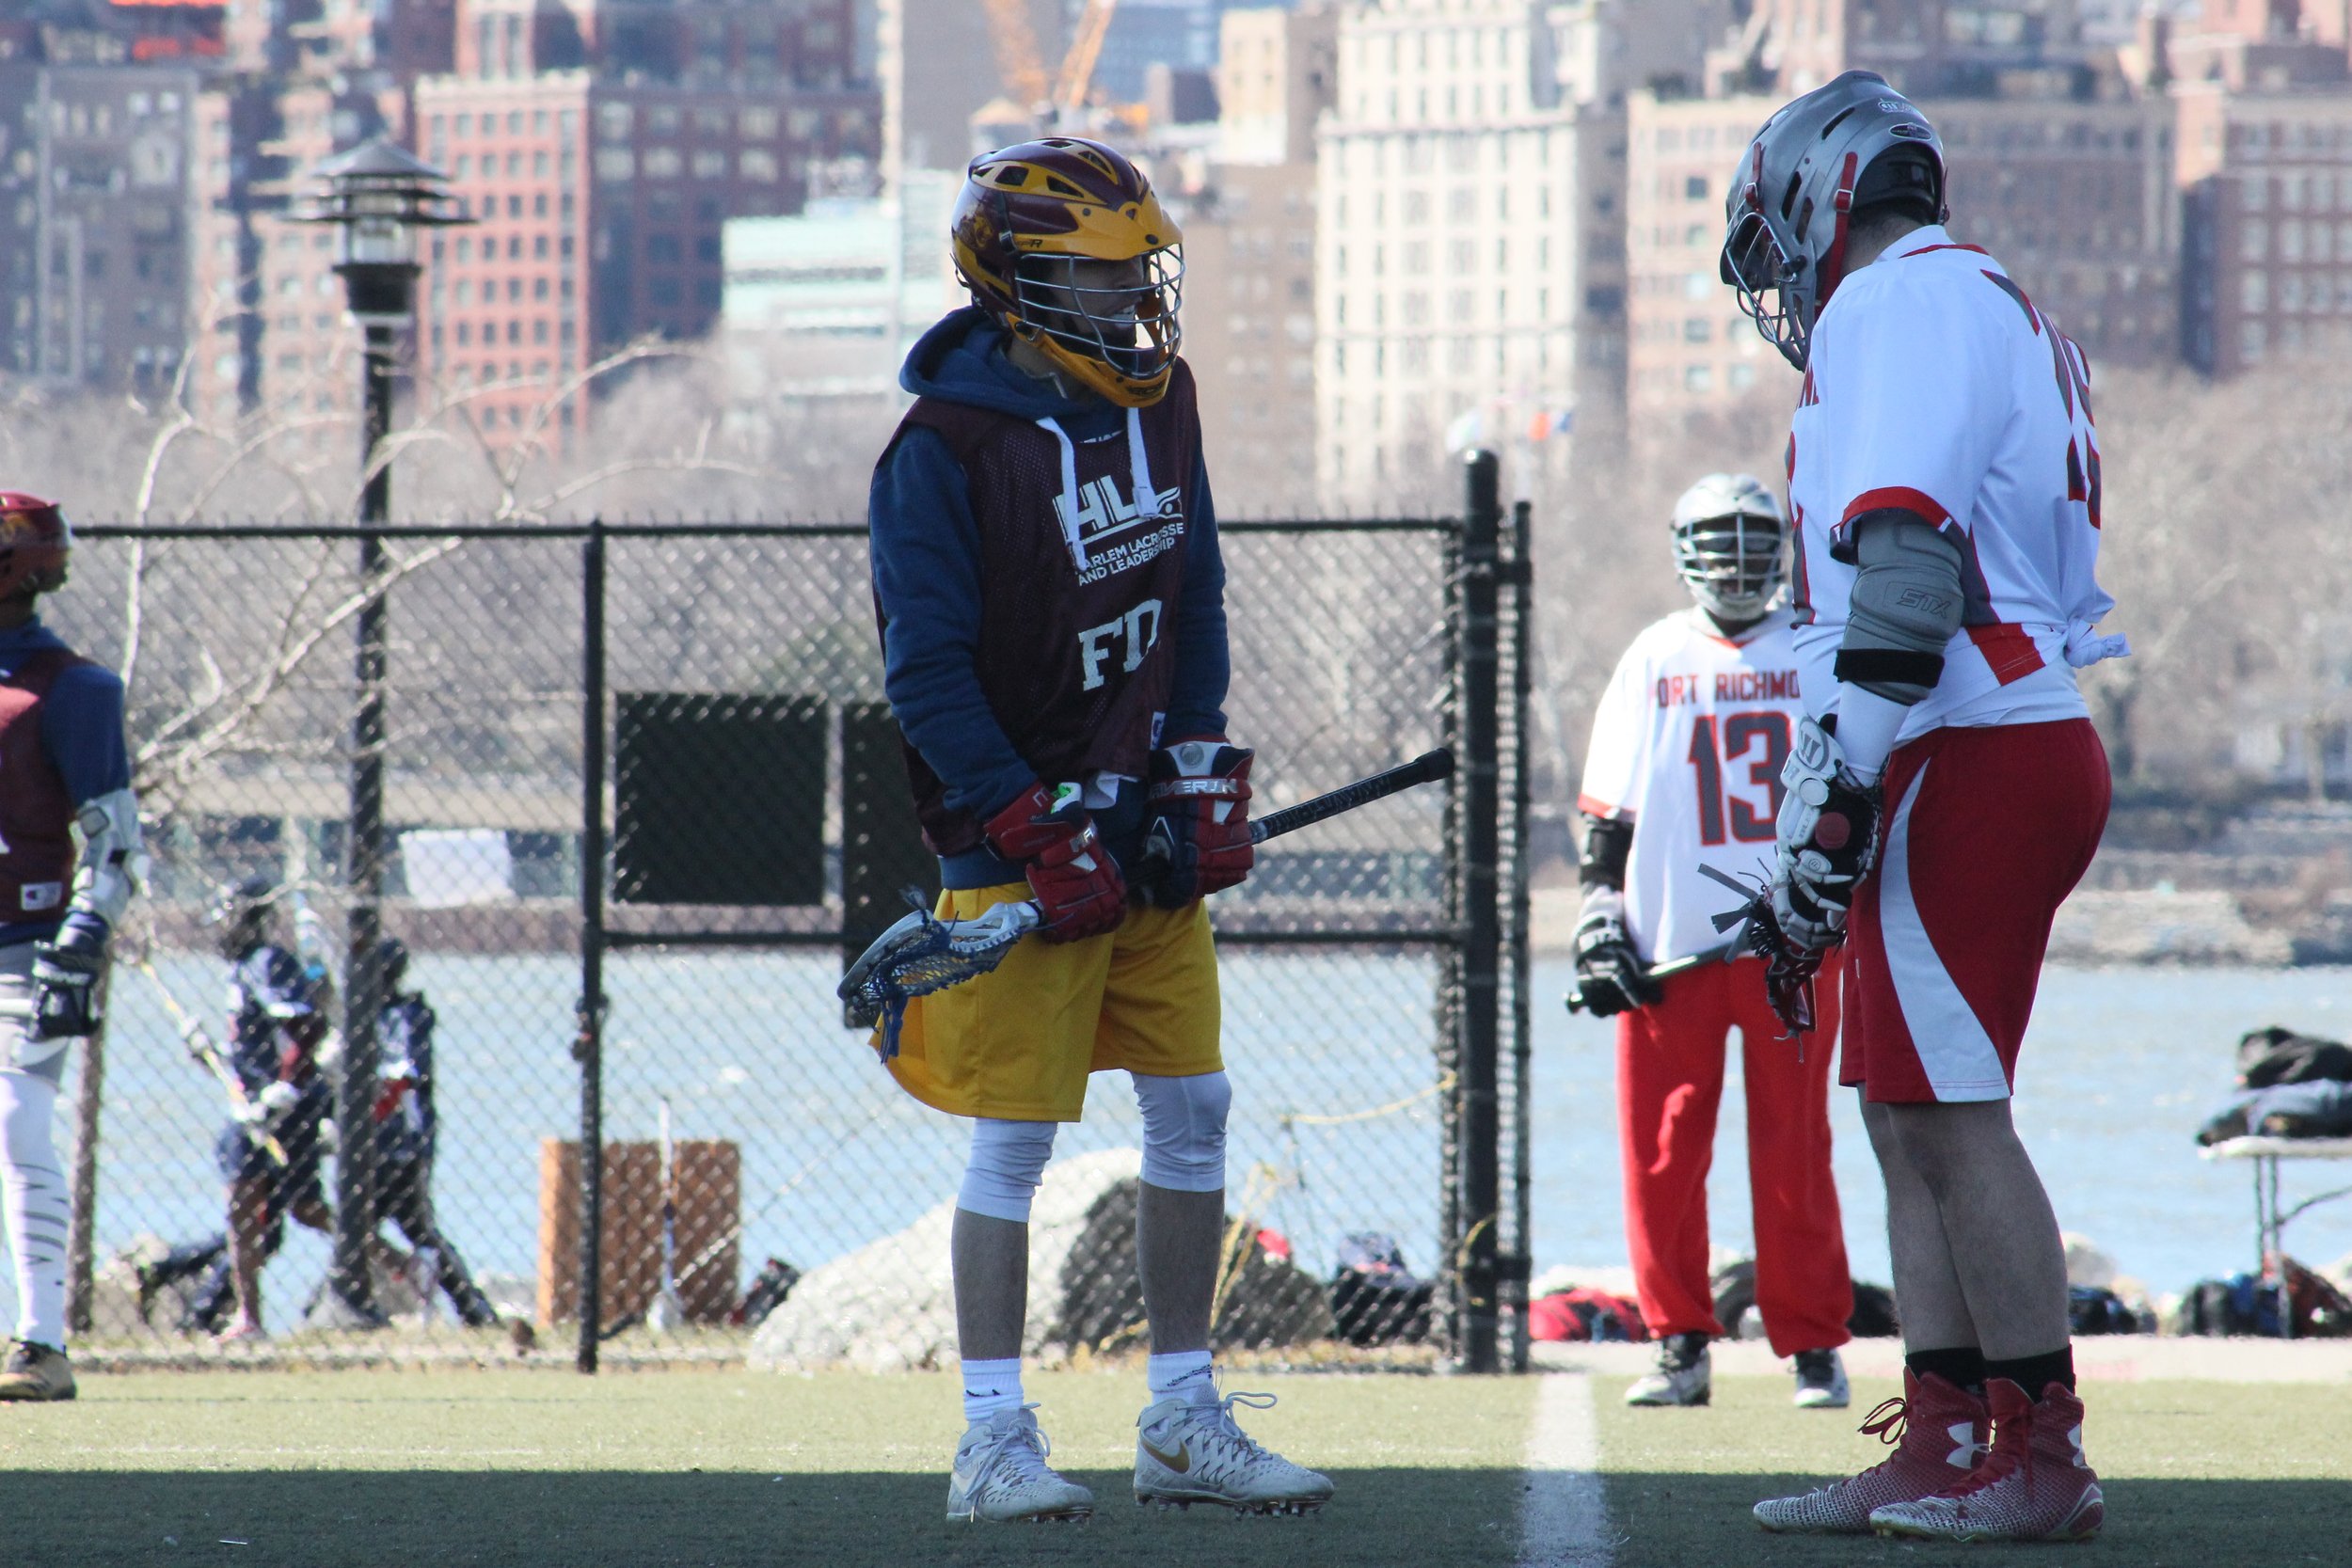  Rashad Saleh is now a sophomore midfielder at Clark University. He is pictured here as a Harlem Lacrosse player at Frederick Douglass Academy in New York City where he was the team captain and school president.  